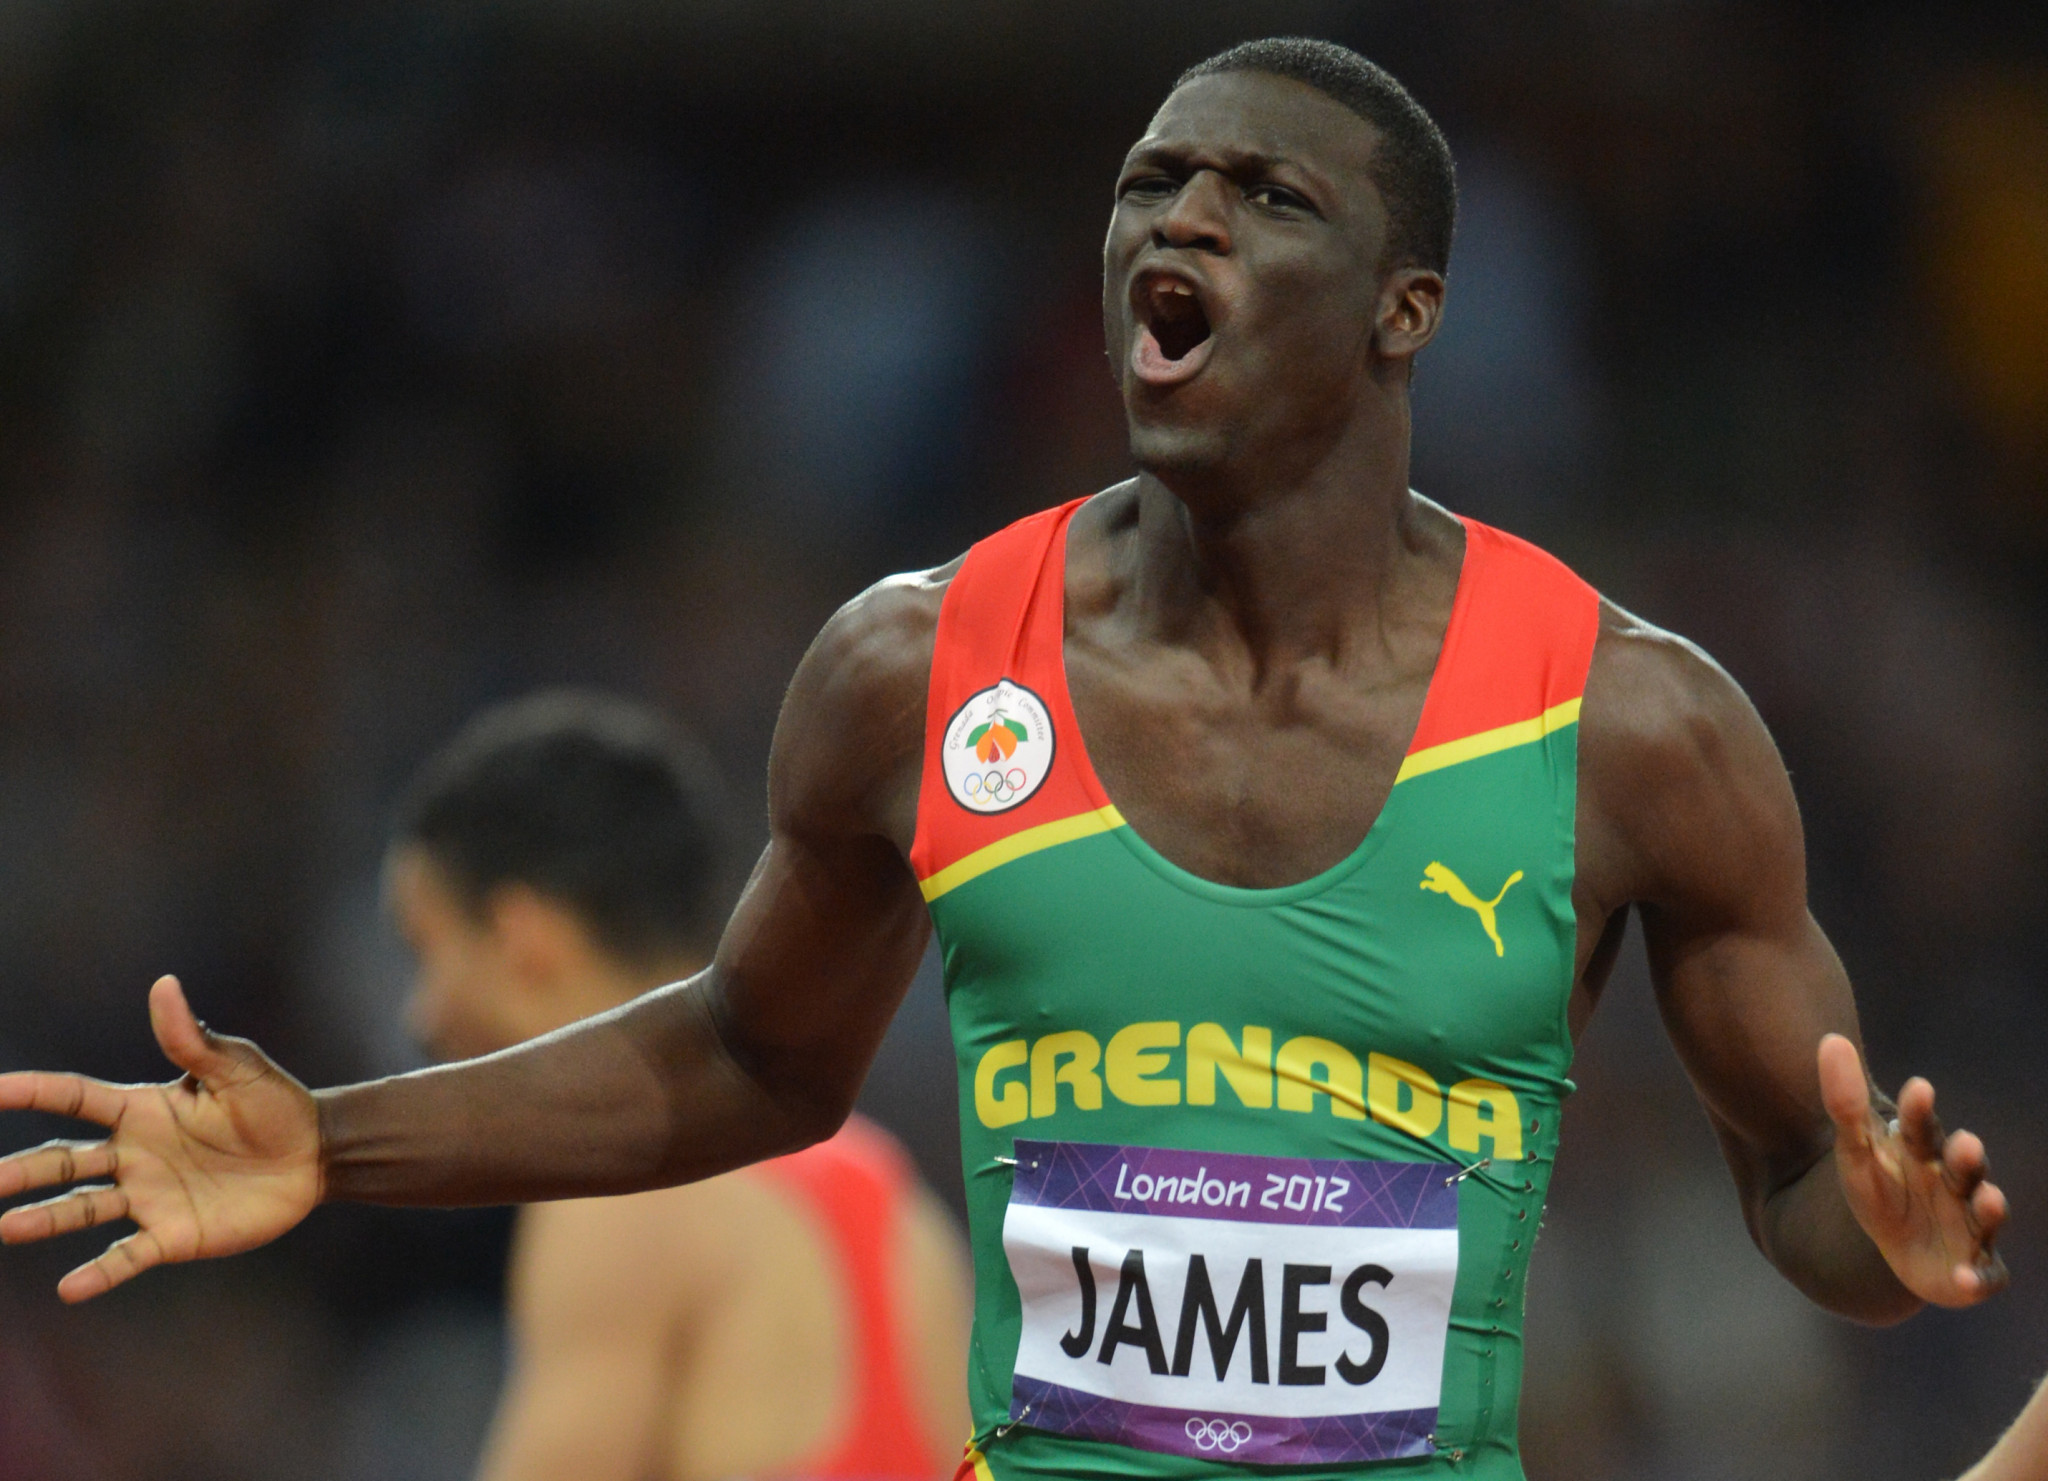 Kirani James is a superstar for Grenada after his Olympic gold at London 2012 ©Getty Images